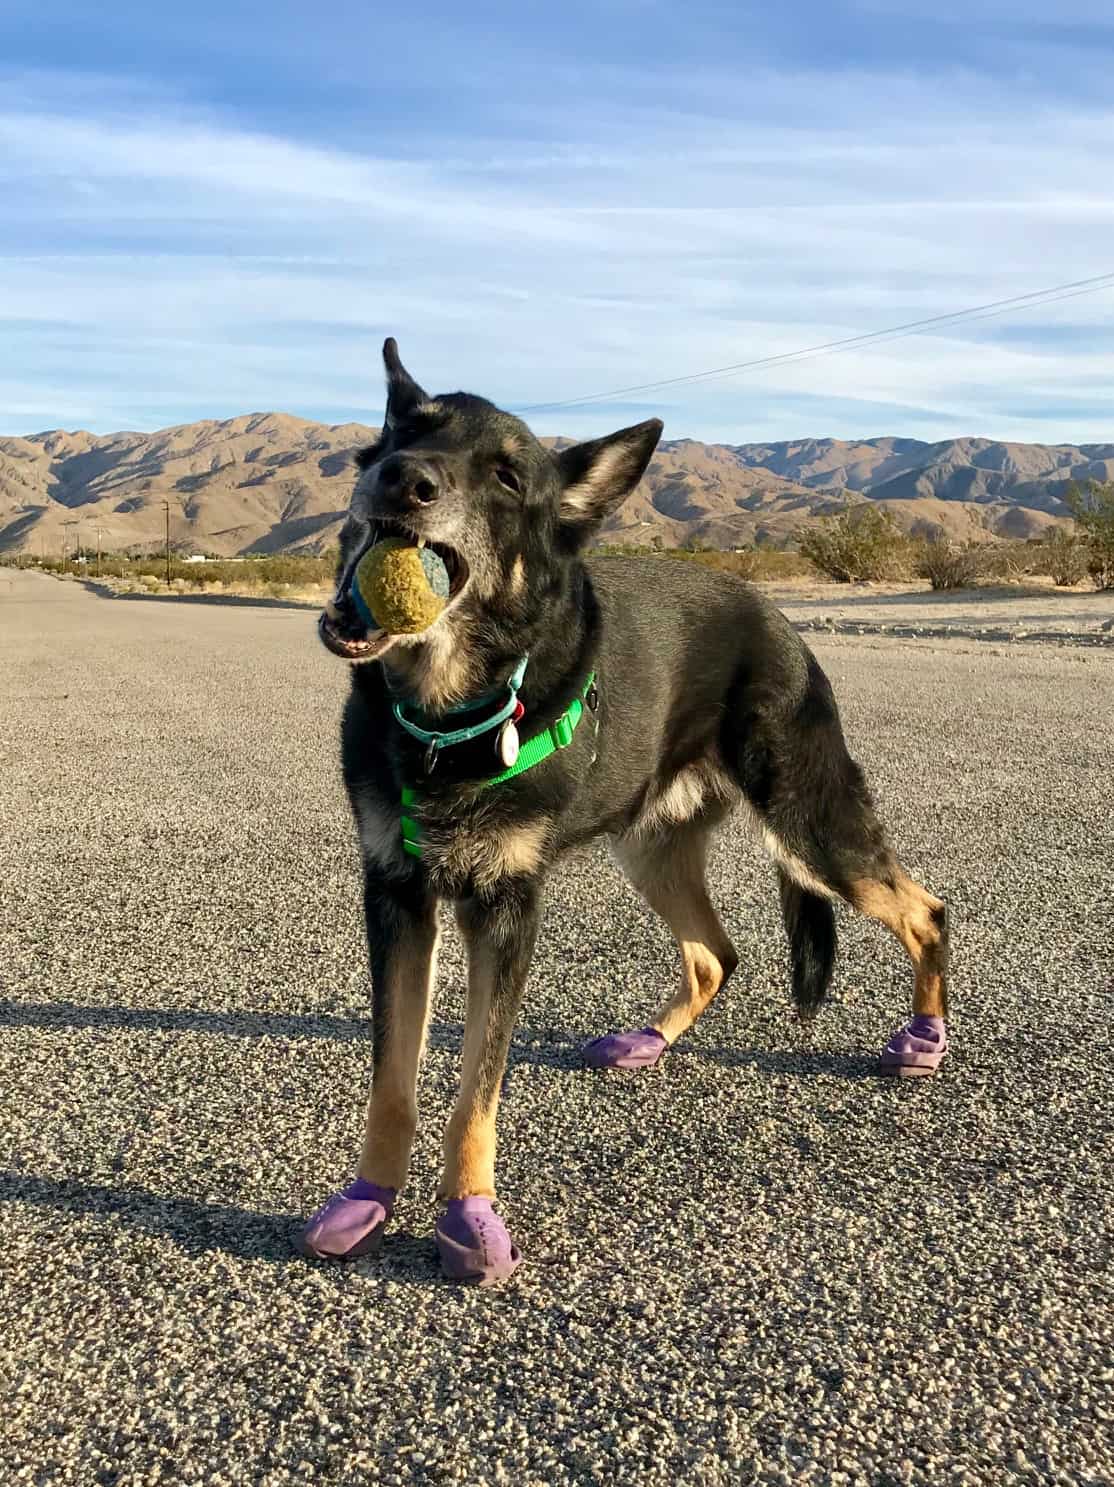 Buster the German Shepherd Dog playing with a ball wearing purple dog boots